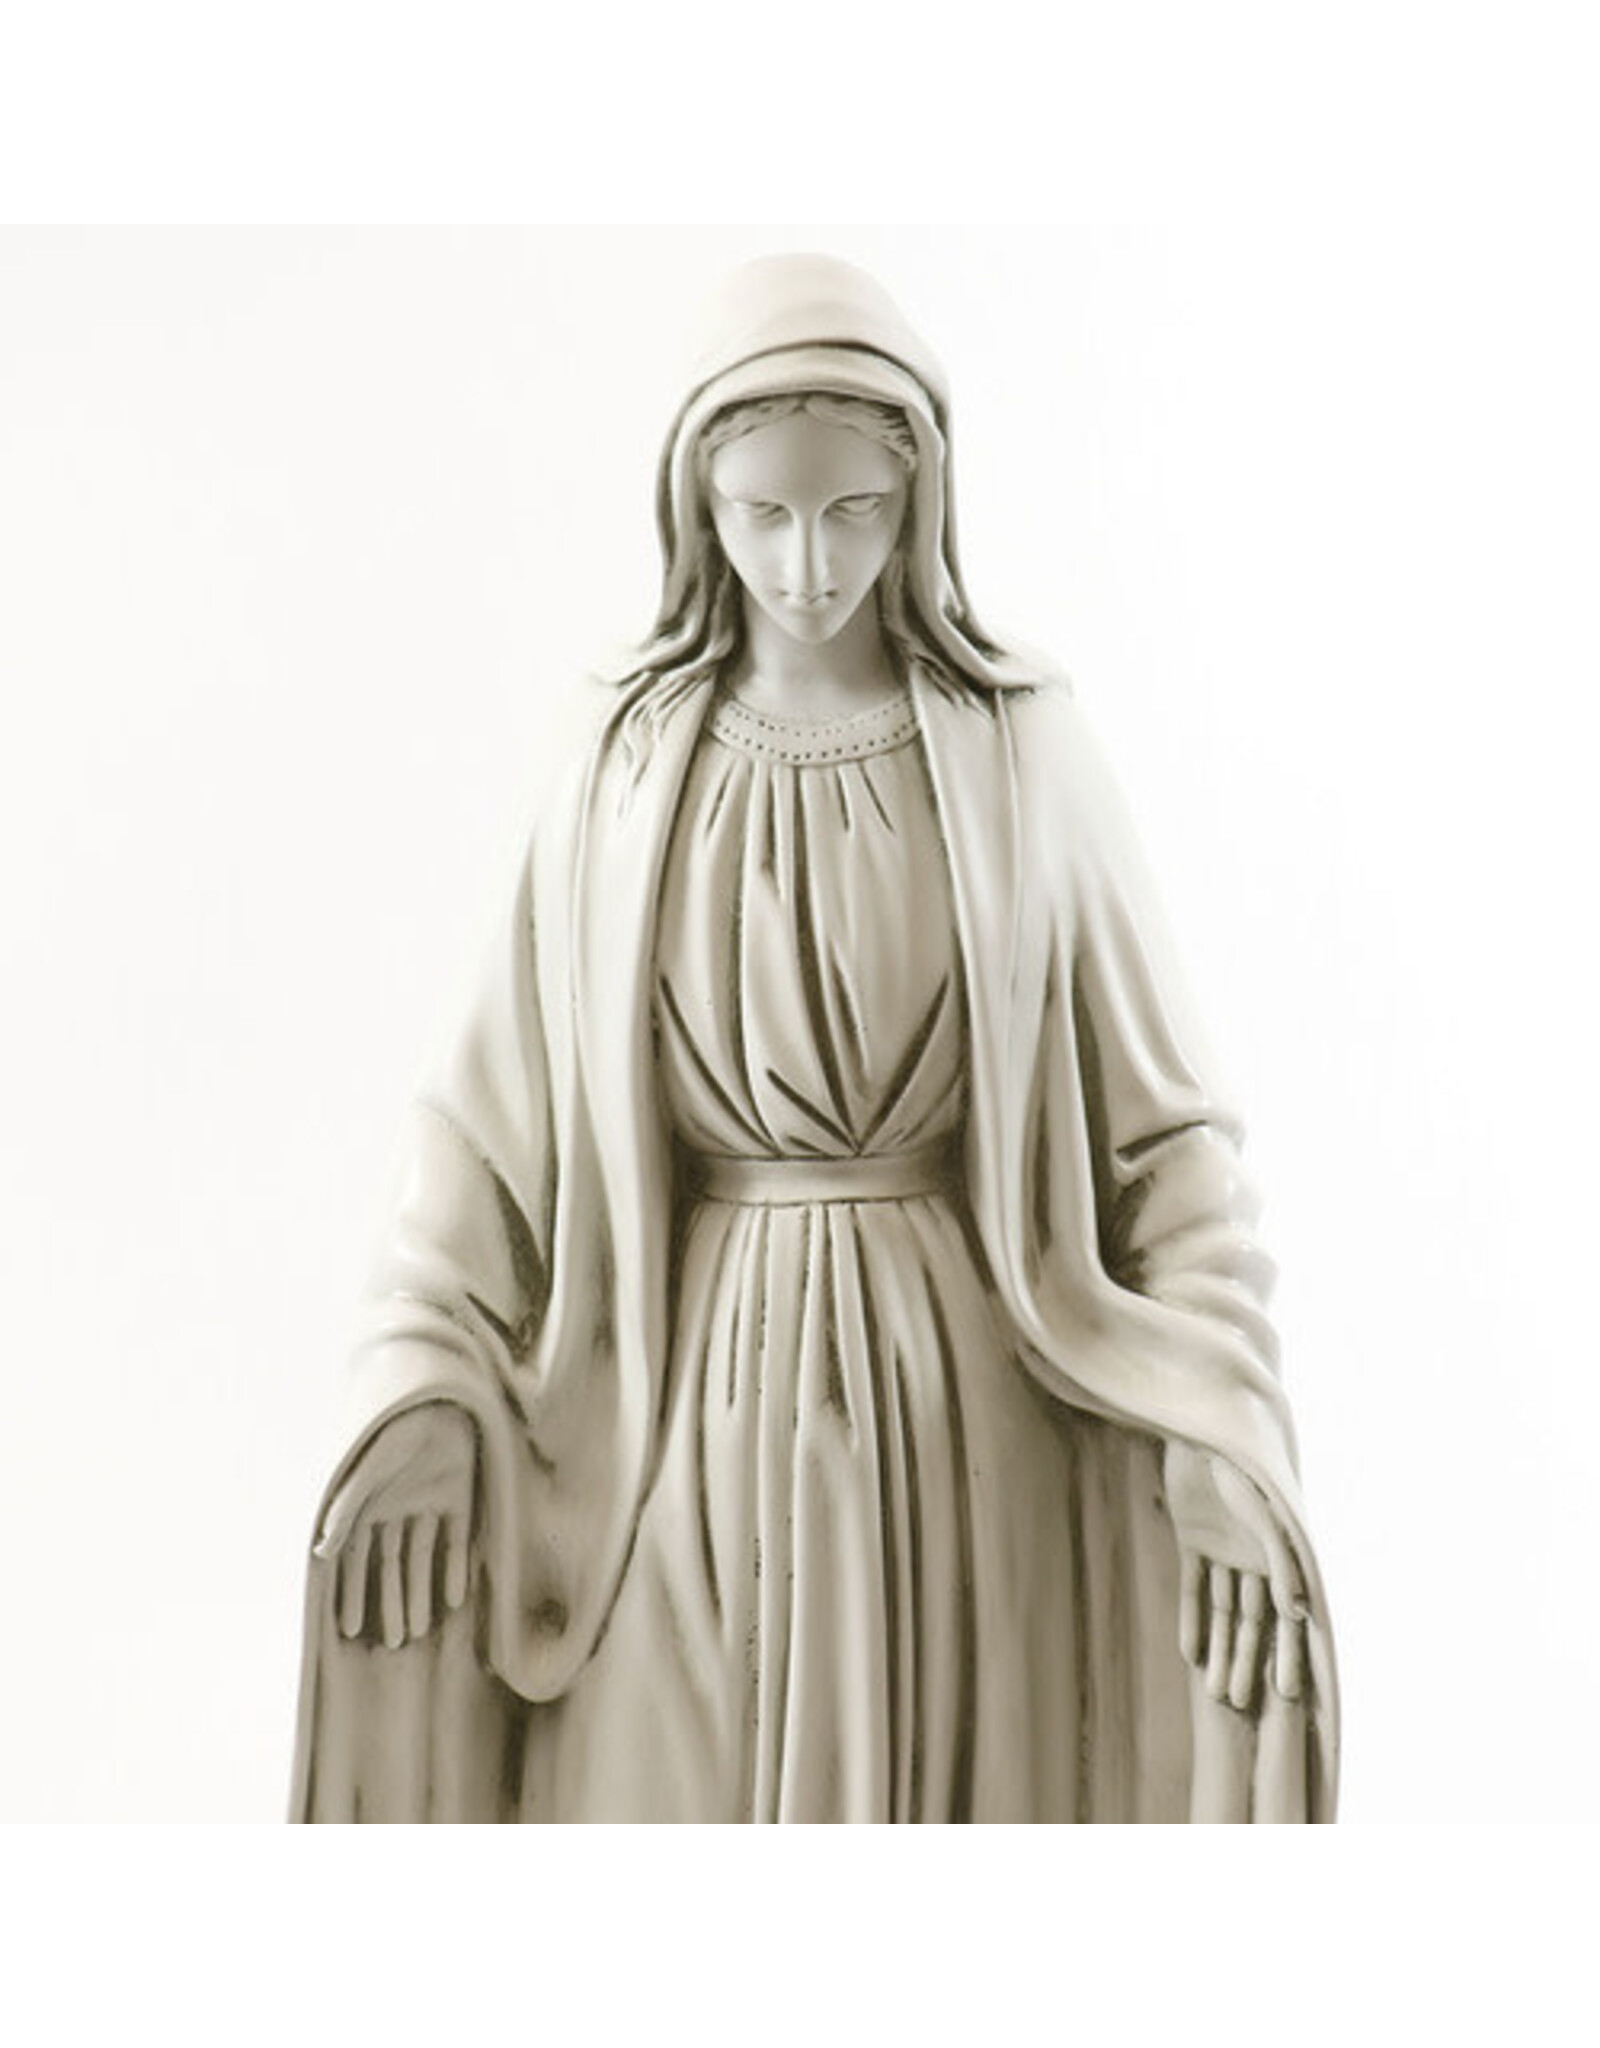 Orlandi Our Lady of Grace Outdoor Statue - Antique Stone Finish (36")